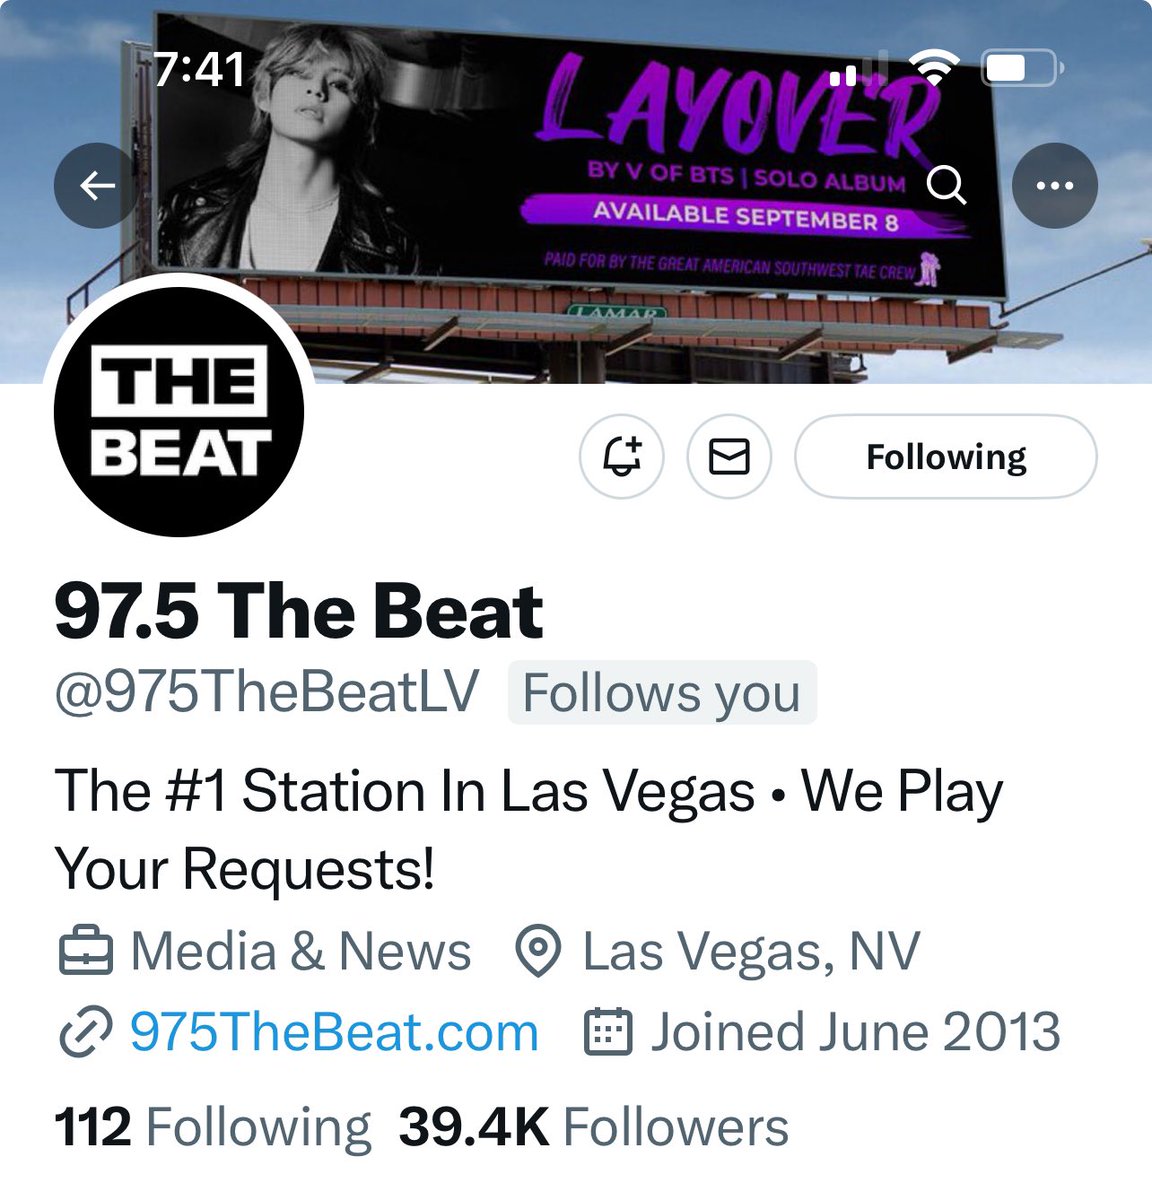 Check out USA radio station in Las Vegas X account @975TheBeatLV new banner photo! It’s the billboard advertisement paid for by #V fans from Southwest USA states! Please follow and support them on instagram too! Here their new #V_FRI_END_S ad in thread and how to song request